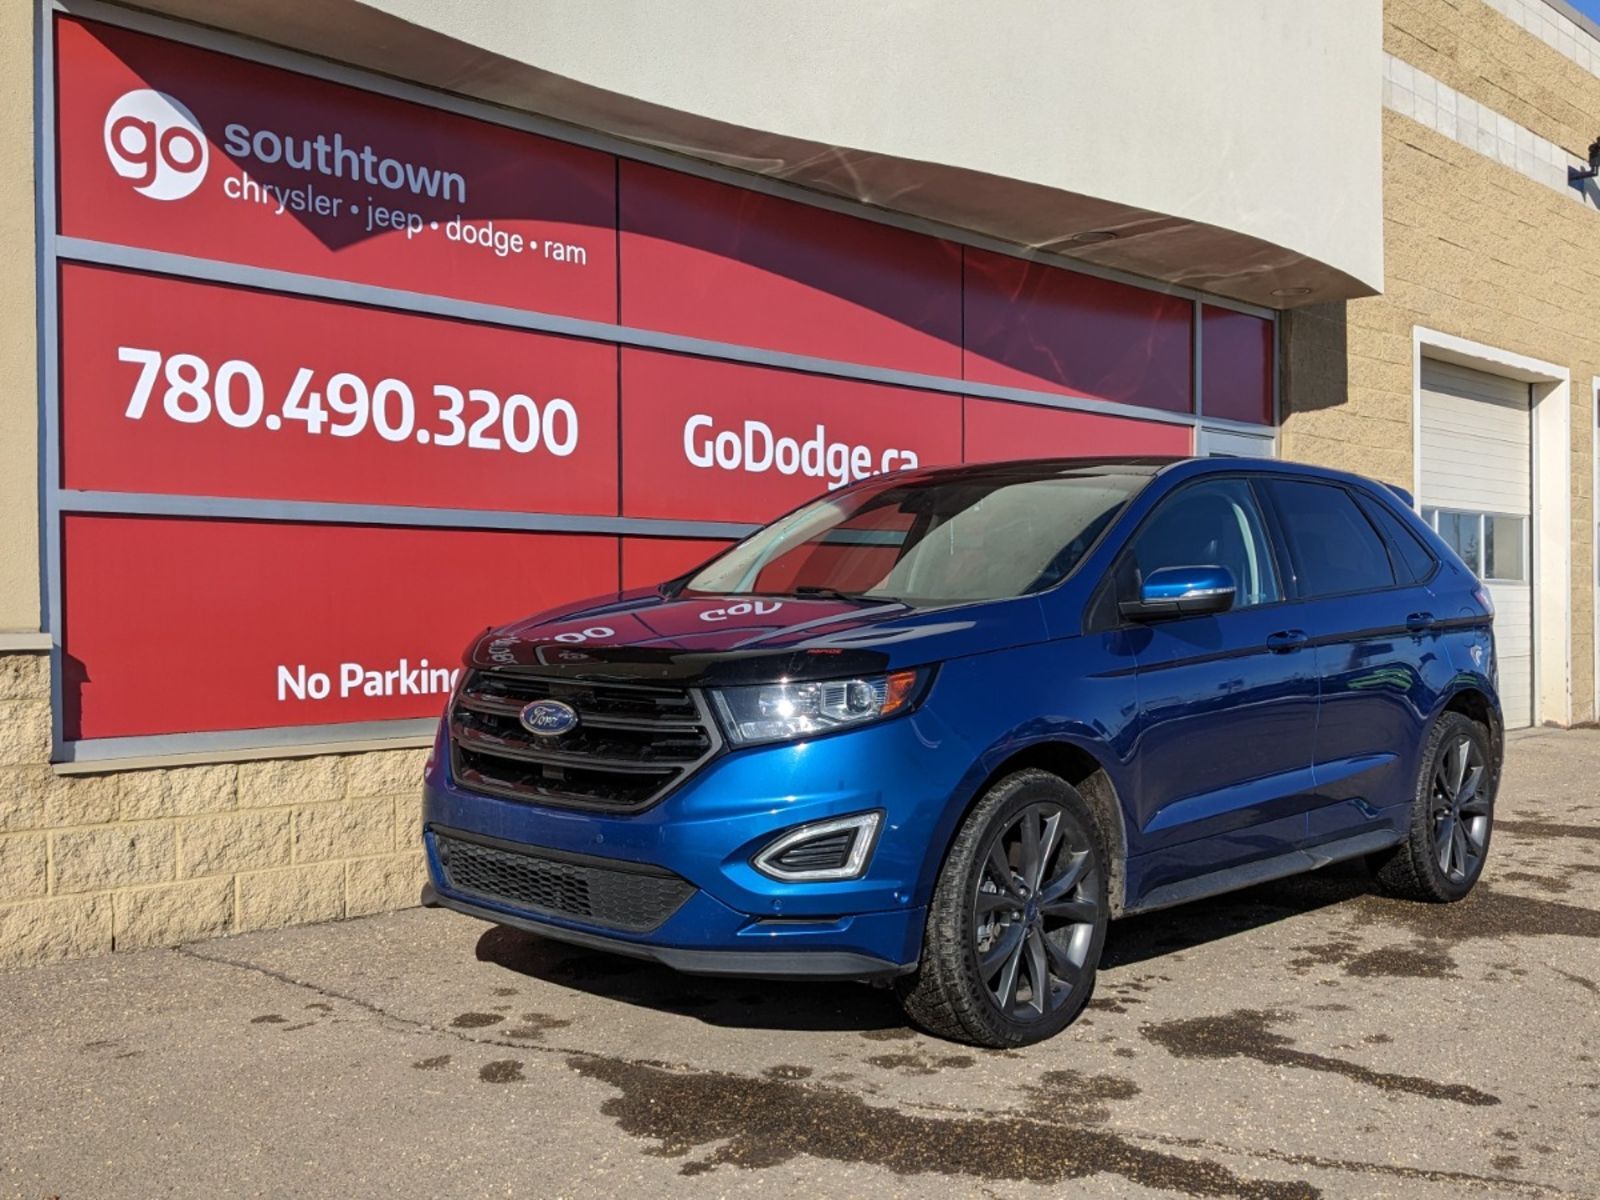 2018 Ford Edge SPORT IN BLUE METALLIC EQUIPPED WITH A 2.7L TURBO 